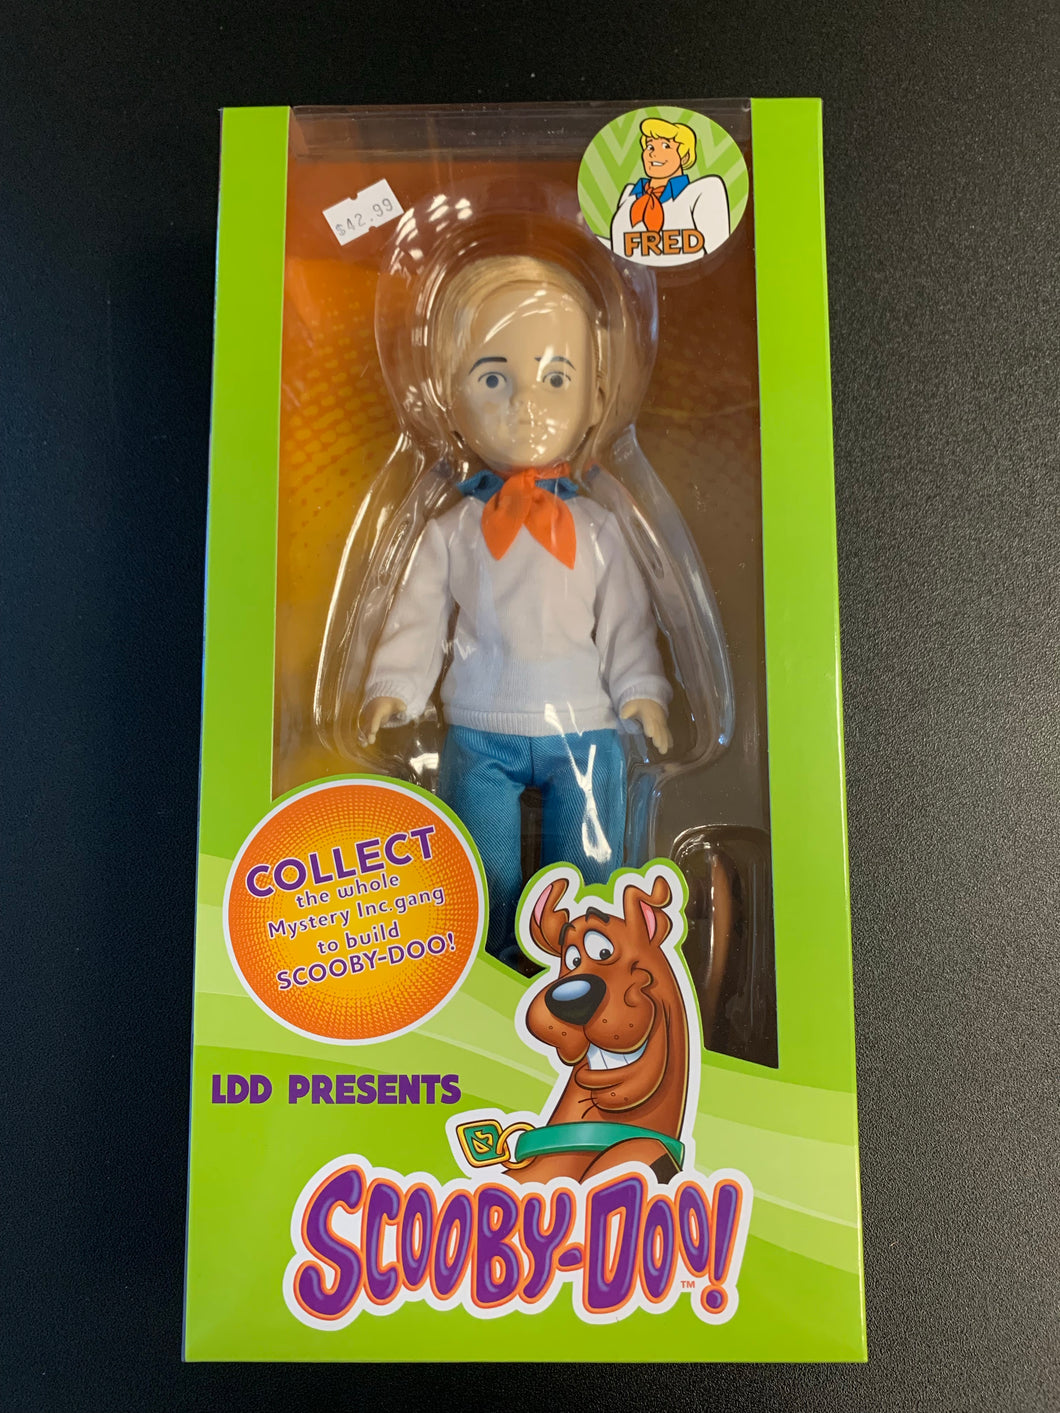 LDD PRESENTS SCOOBY-DOO FRED DOLL